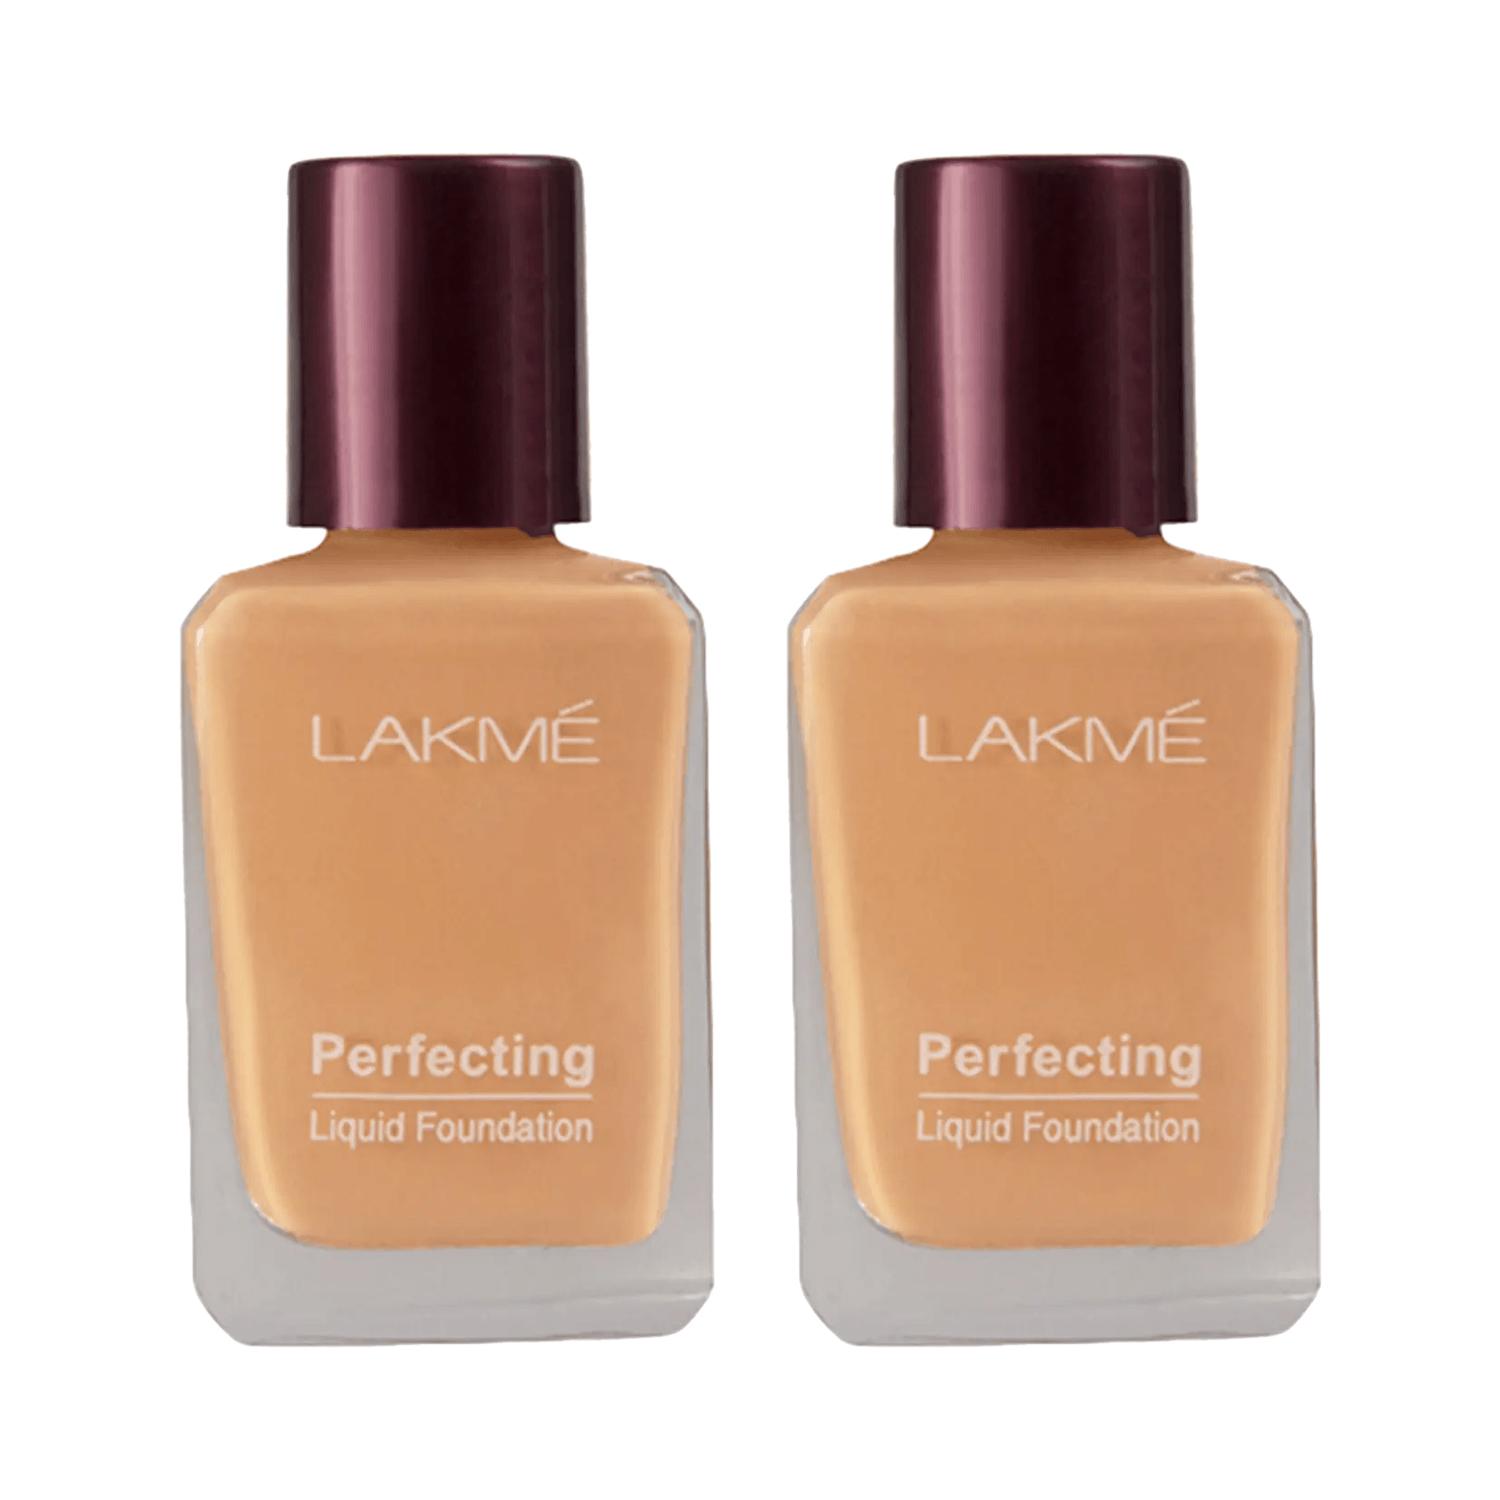 Lakme | Lakme Perfecting Liquid Foundation Natural Coral (27 ml) - (Pack of 2)